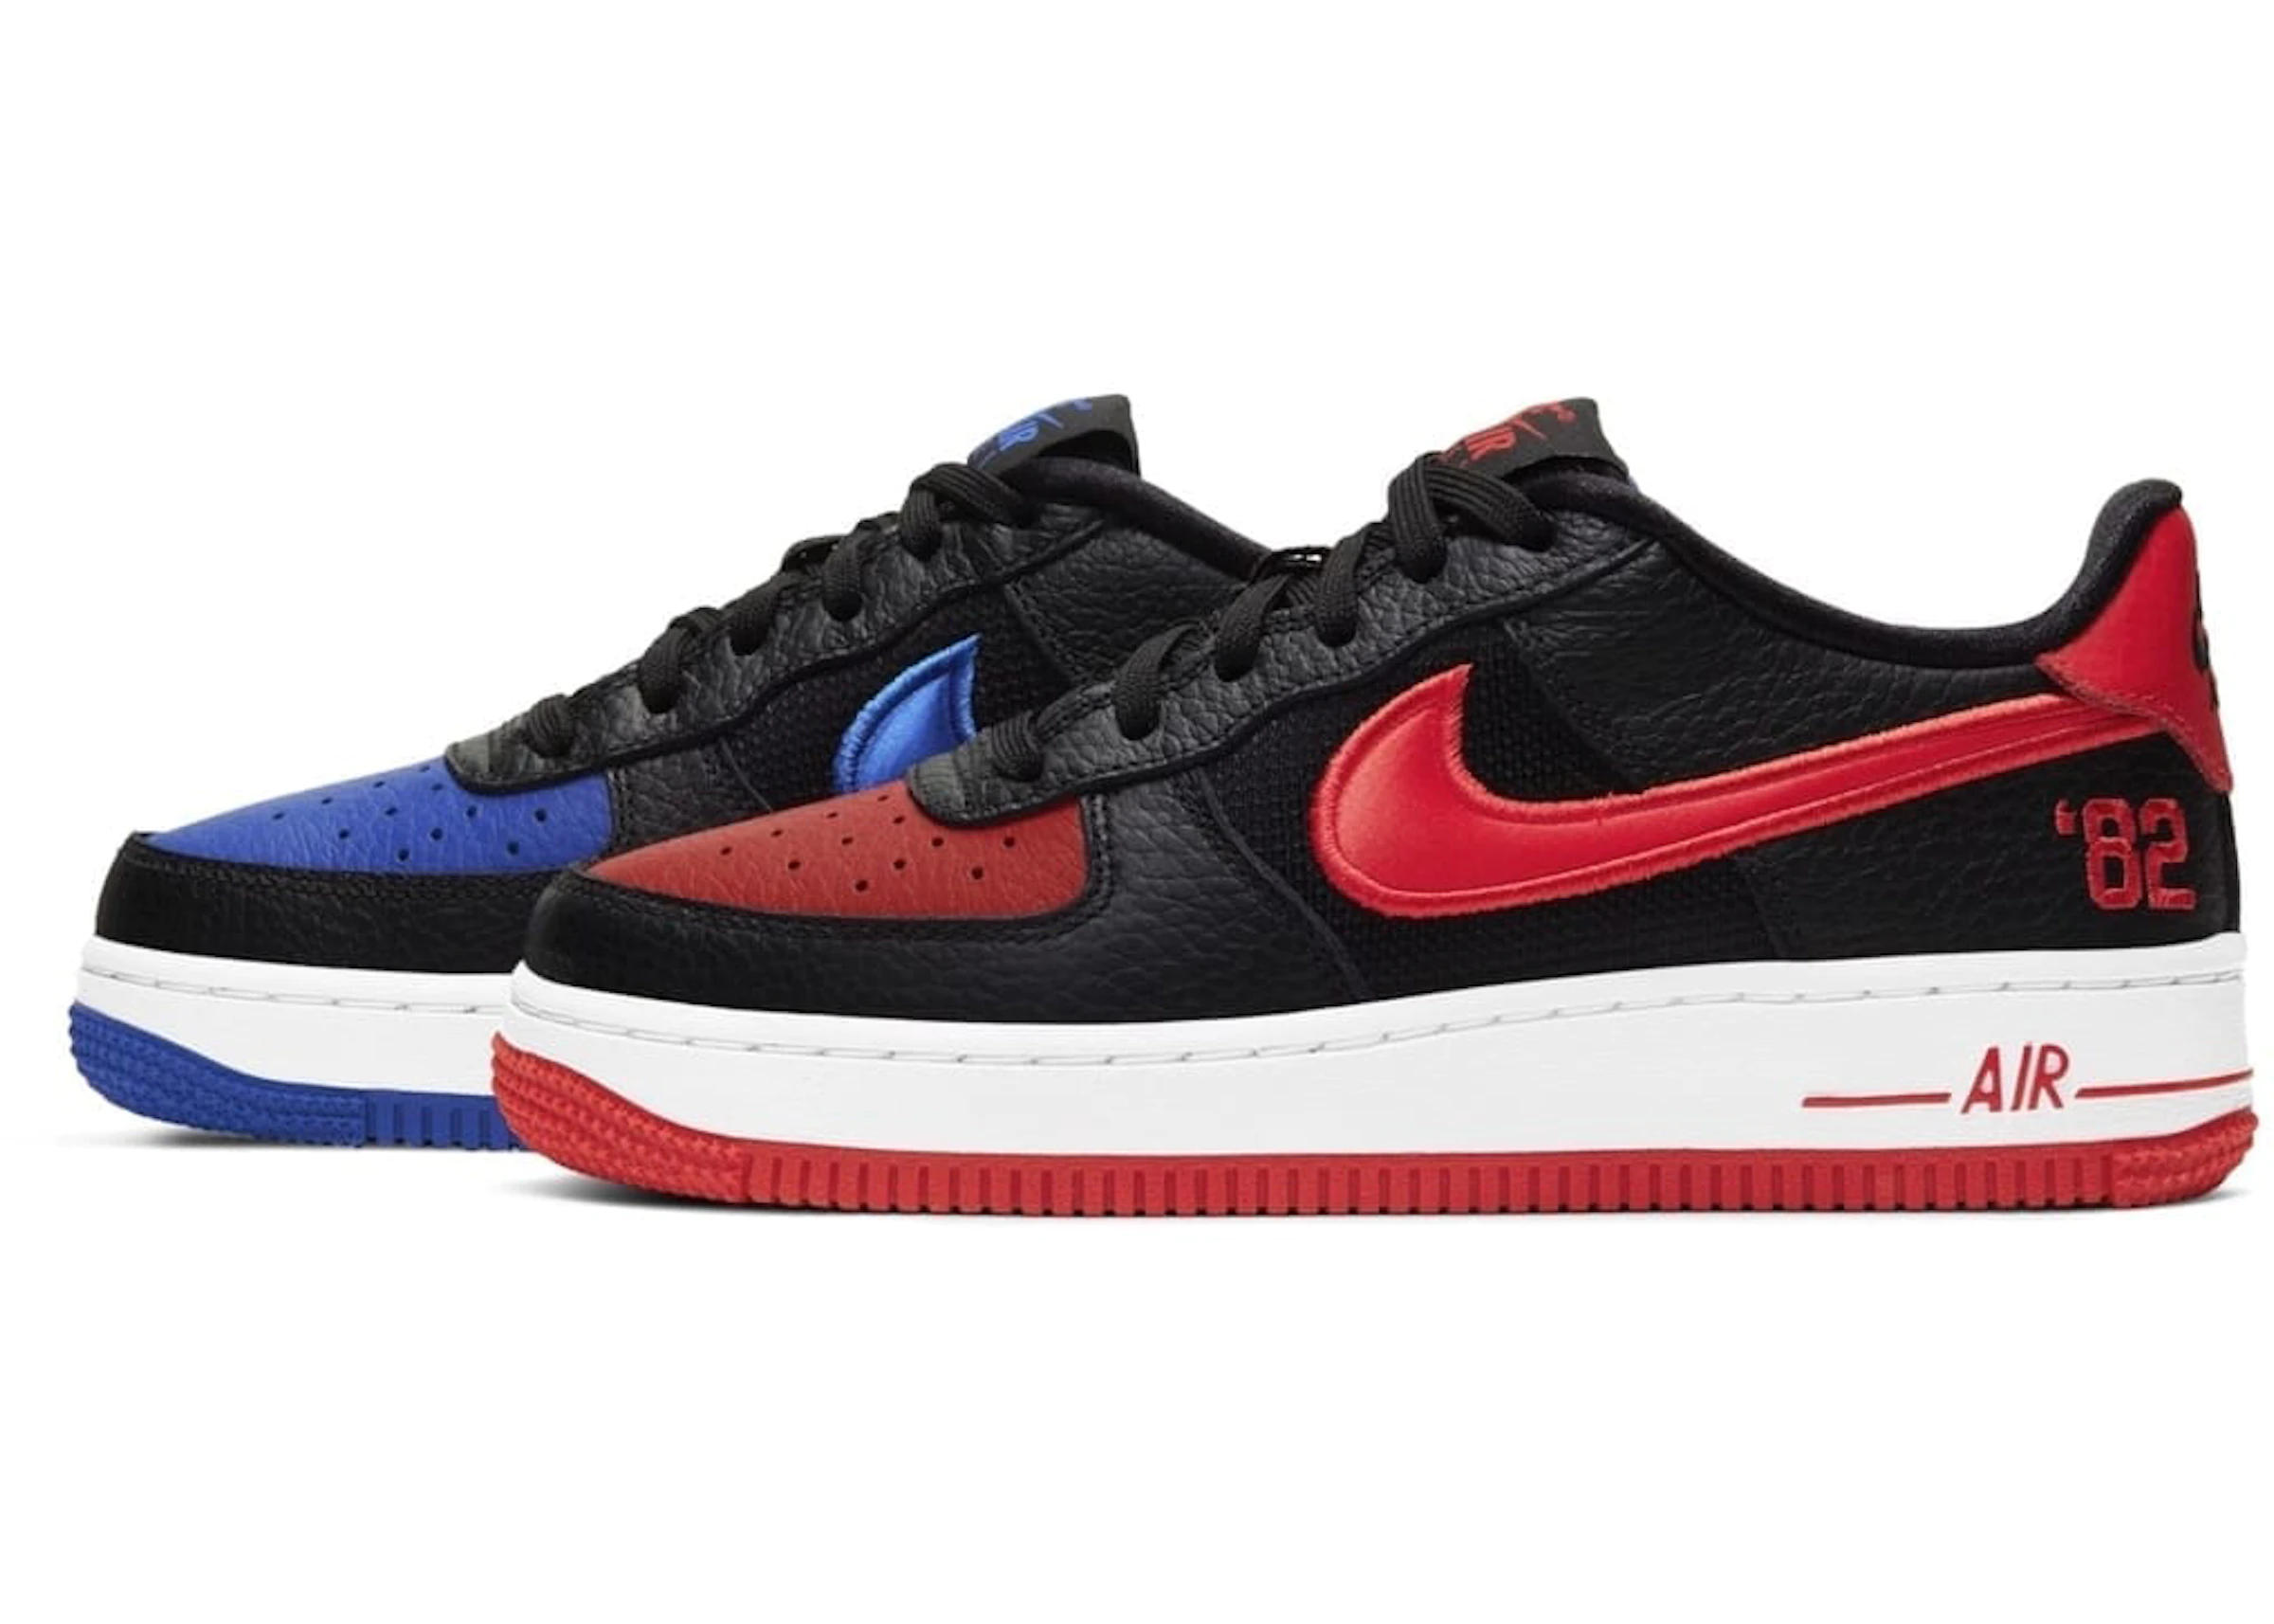 esquina Persona enferma Asesinar Nike Air Force 1 Low 82 (GS) - DH0201-001 - ES